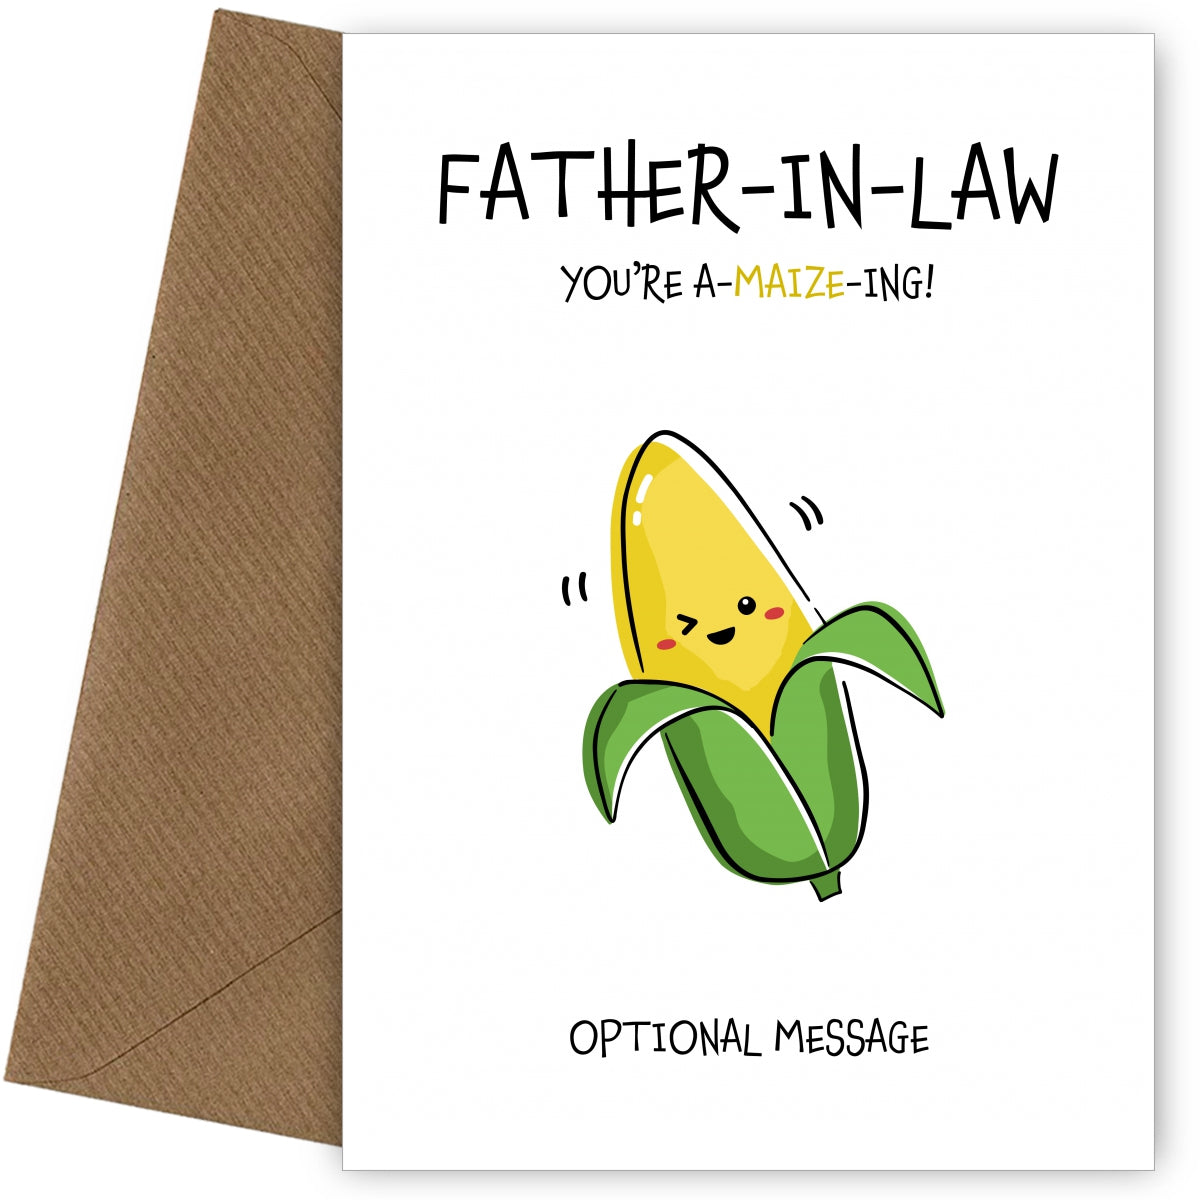 Amazing Birthday Card for Father-in-law - You're A-Maize-ing